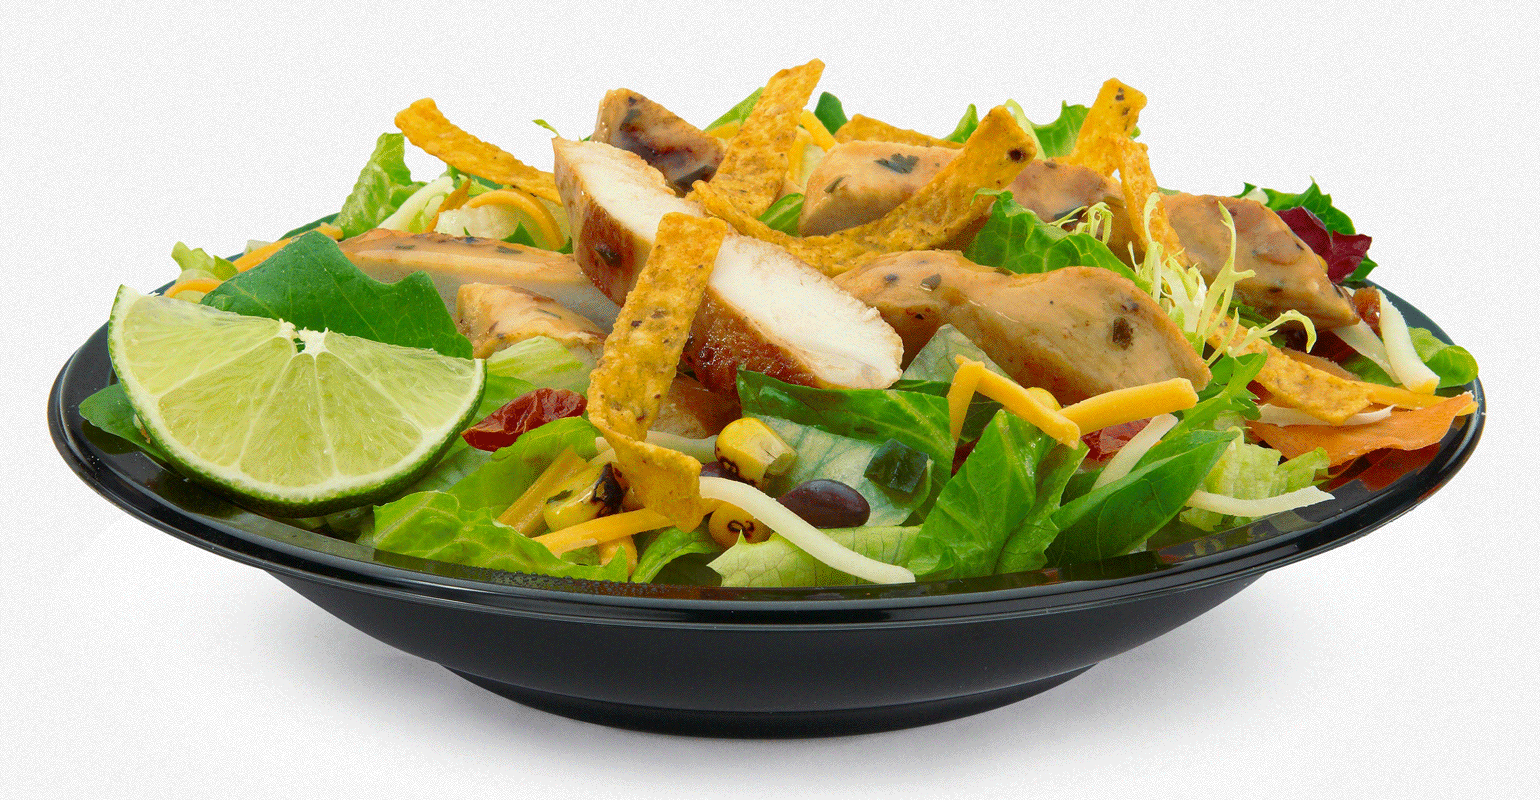 Health officials McDonald’s salads linked to 61 cases in 7 states